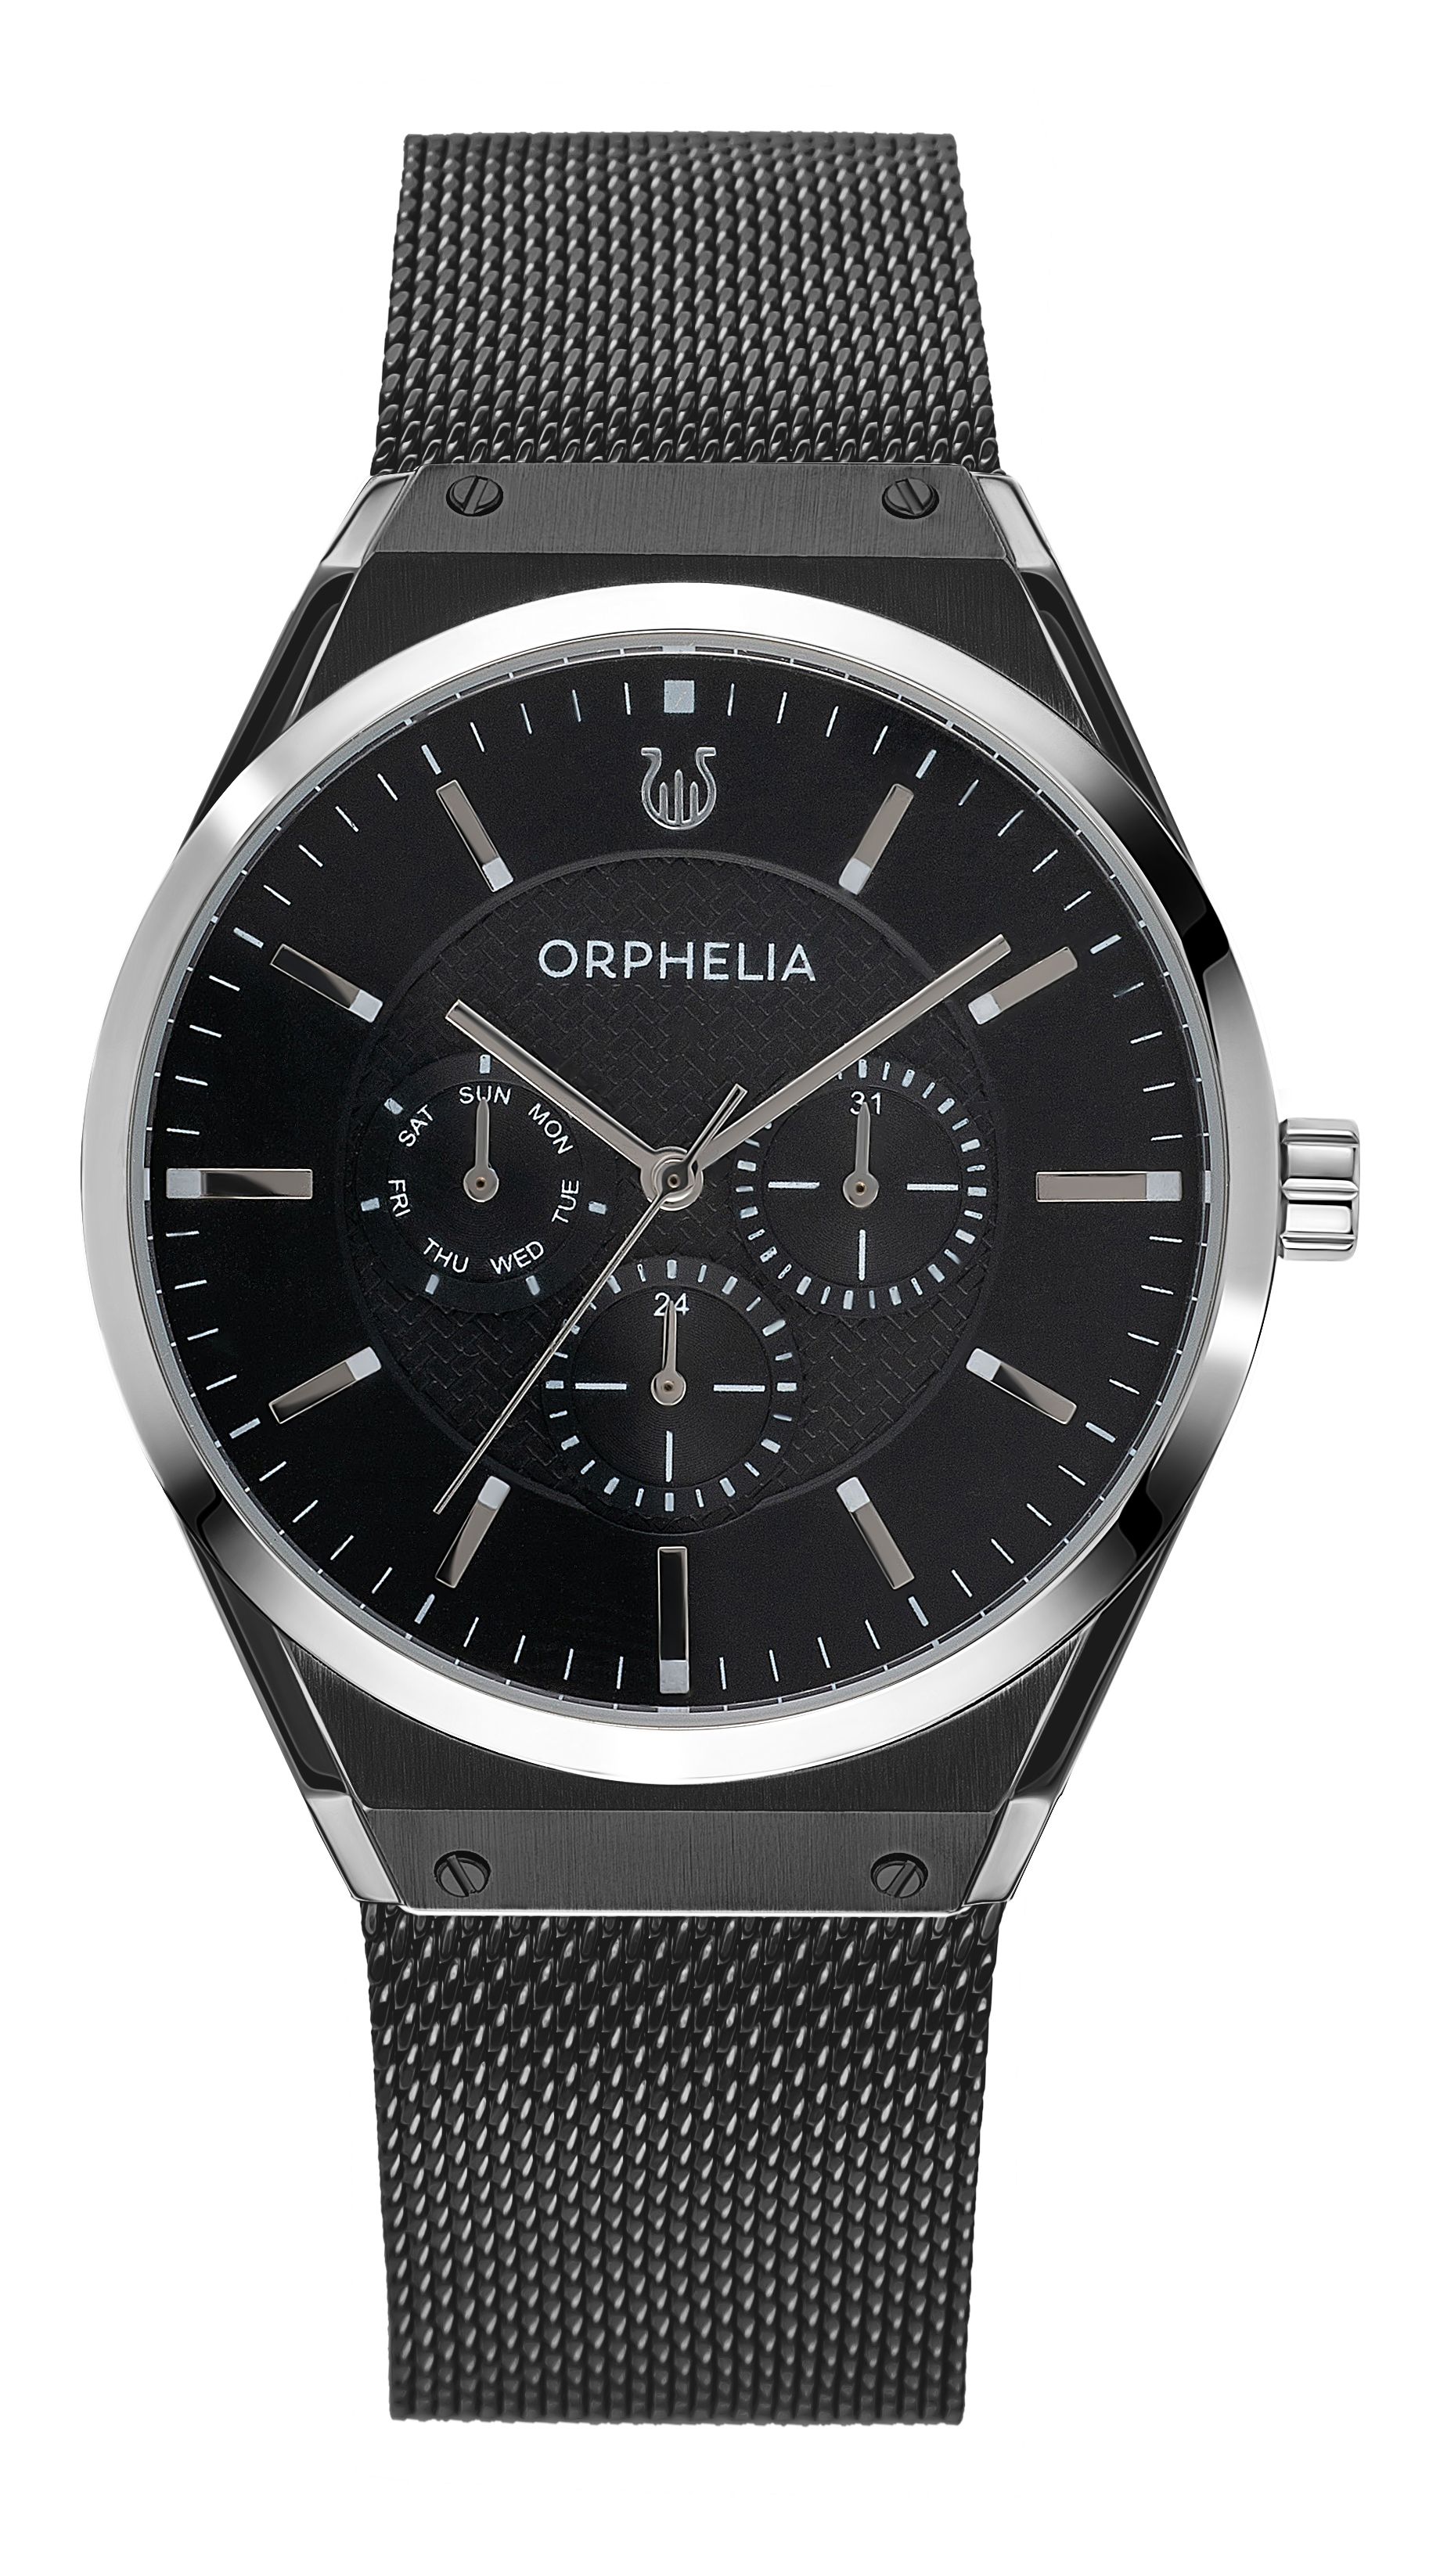 This Orphelia Saffiano Multi Dial Watch for Men is the perfect timepiece to wear or to gift. It's Black 41 mm Round case combined with the comfortable Black Stainless steel watch band will ensure you enjoy this stunning timepiece without any compromise. Operated by a high quality Quartz movement and water resistant to 3 bars, your watch will keep ticking. GREAT DESIGN: ORPHELIA Saffiano Multi dial  watch with a Miyota Quartz movement includes a date display and has a mesh band. This watch features a 24 hour display. Perfect for parties, date nights and wearing in the office. PREMIUM QUALITY: By using high-quality materials  Glass: Mineral Glass  Case material: Stainless steel  Bracelet material: Stainless steel- Water resistant: 3 bars COMPACT SIZE: Case diameter: 41 mm  Height: 9 mm  Strap- Length: 22 cm  Width: 20 mm. Due to this practical handy size  the watch is absolutely for everyday use-Weight: 92 g